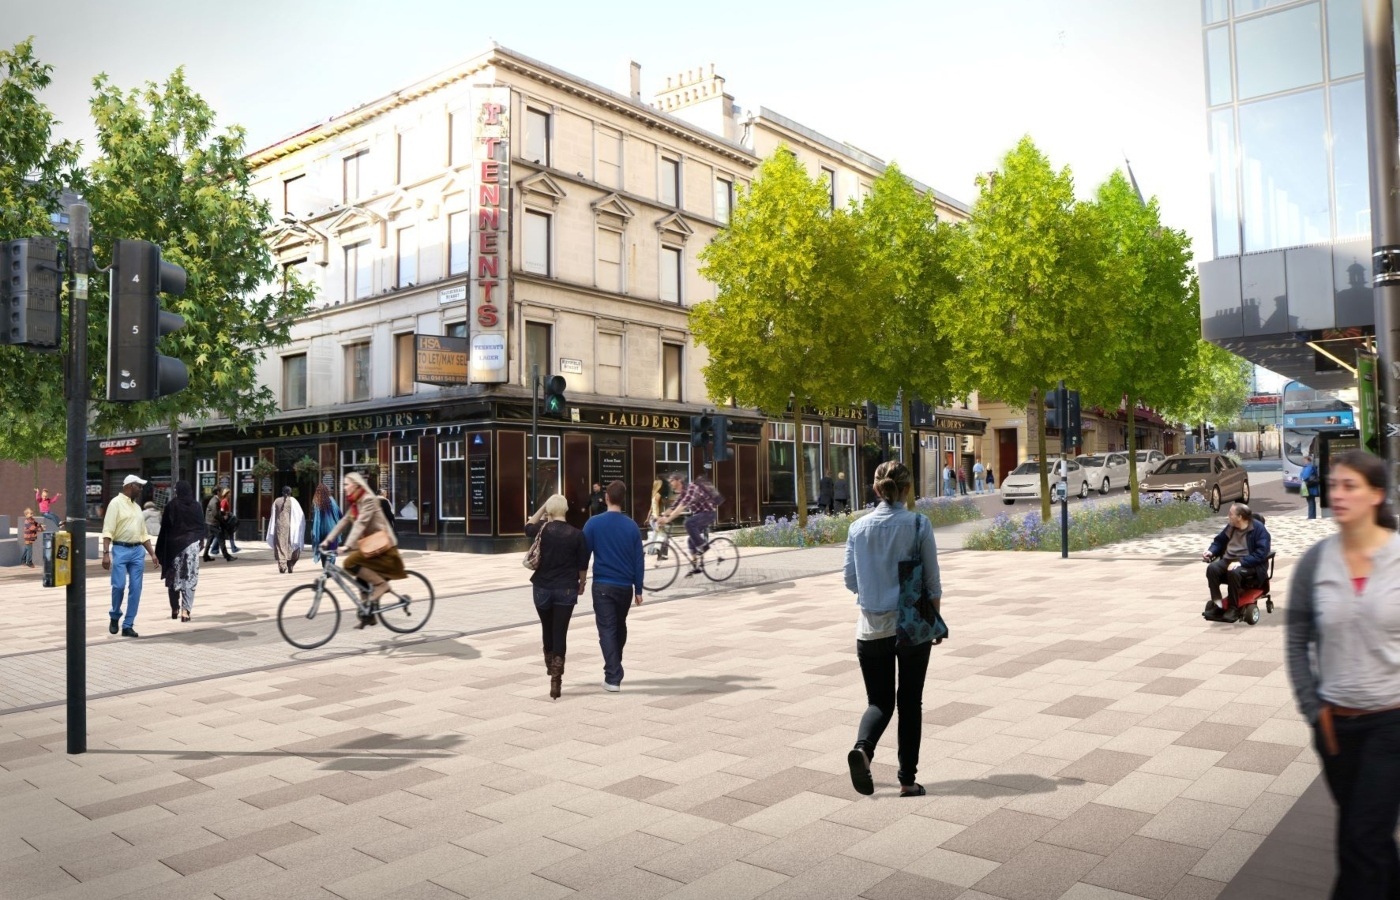 The Glasgow street is set to get a £5.7m makeover with 40 new trees, lighting and the rebuilding of roads, and footpaths. 